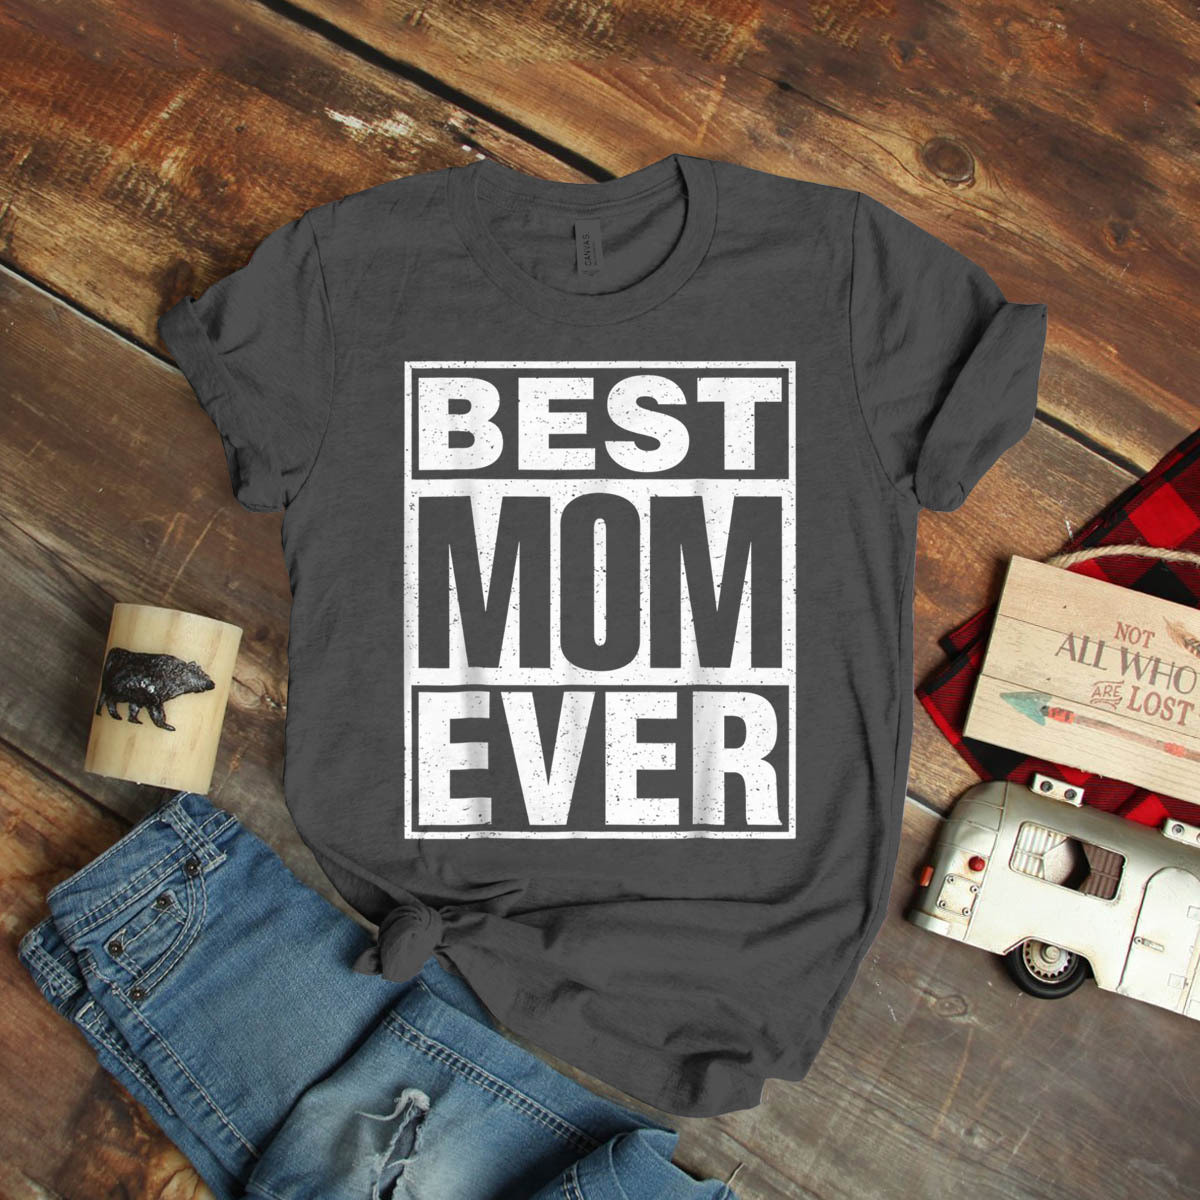 Birthday Gift Ideas For Mom From Son
 Best Mom Ever From Daughter Son Funny Ideas Birthday Gift